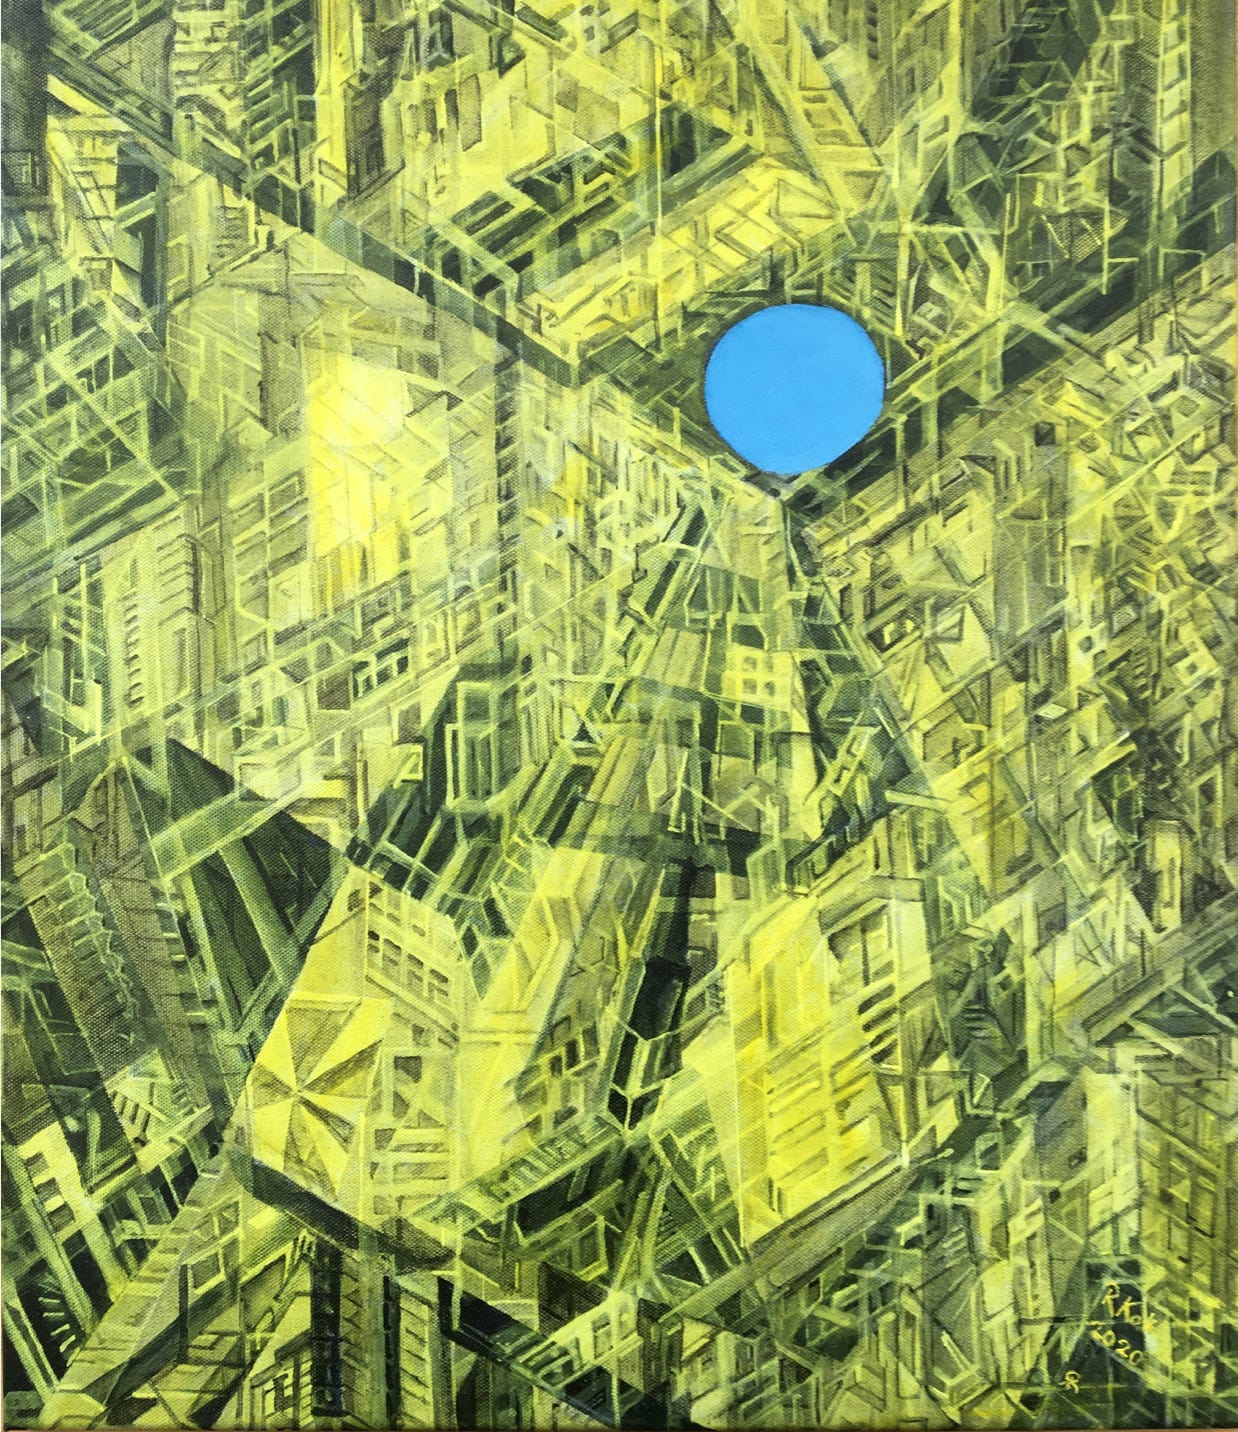 Abstract painting of a complex city in oil on canvas